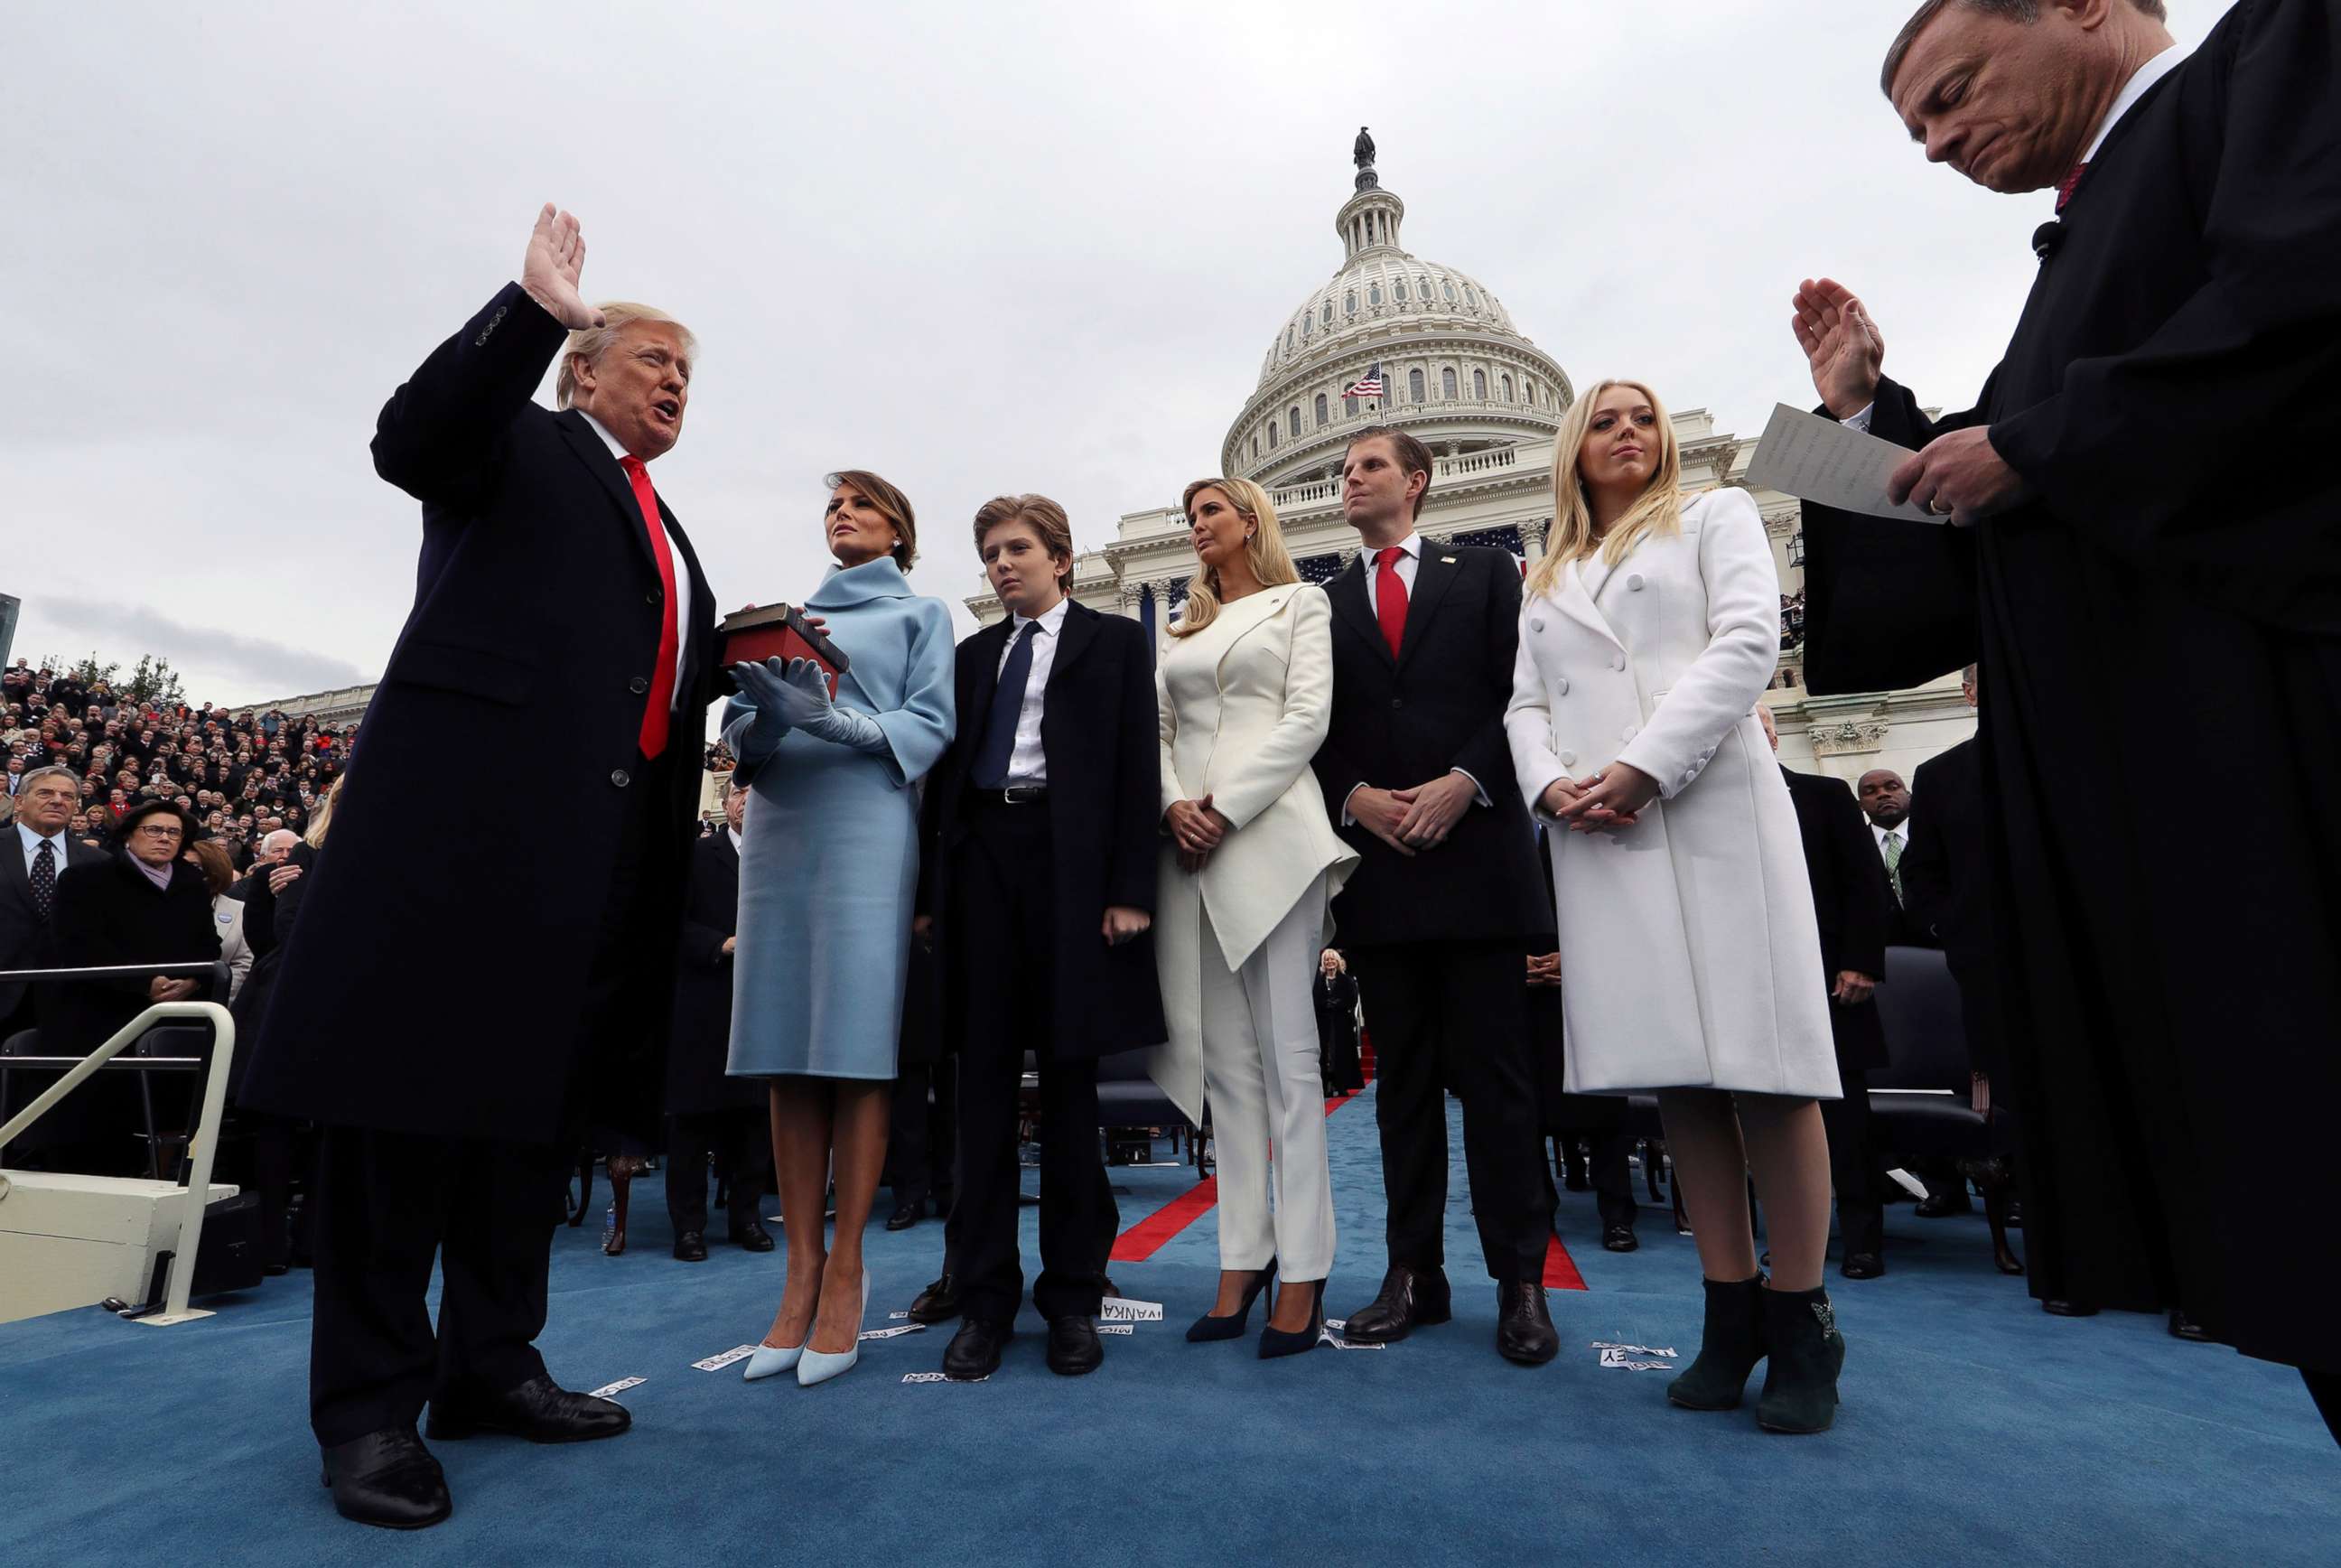 PHOTO: President Donald Trump takes the oath of office administered by Supreme Court Chief Justice John Roberts at the Capitol, Jan. 20, 2017.